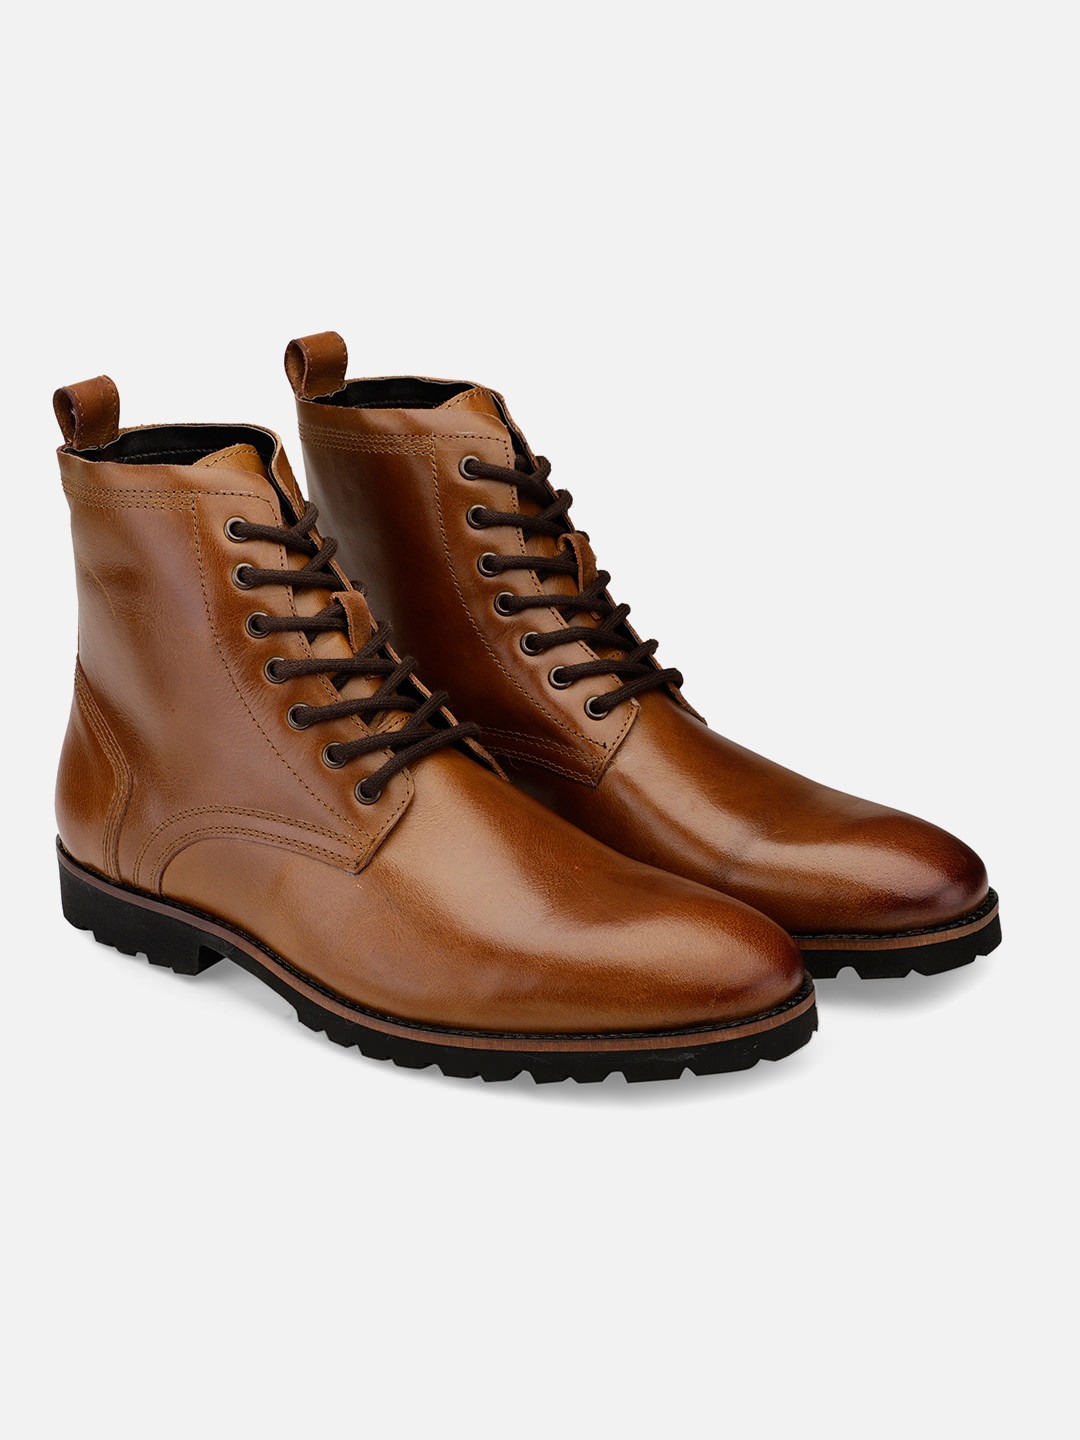 Buy Online Genuine Leather Tan Lace-Up Boots | Handcrafted Boots